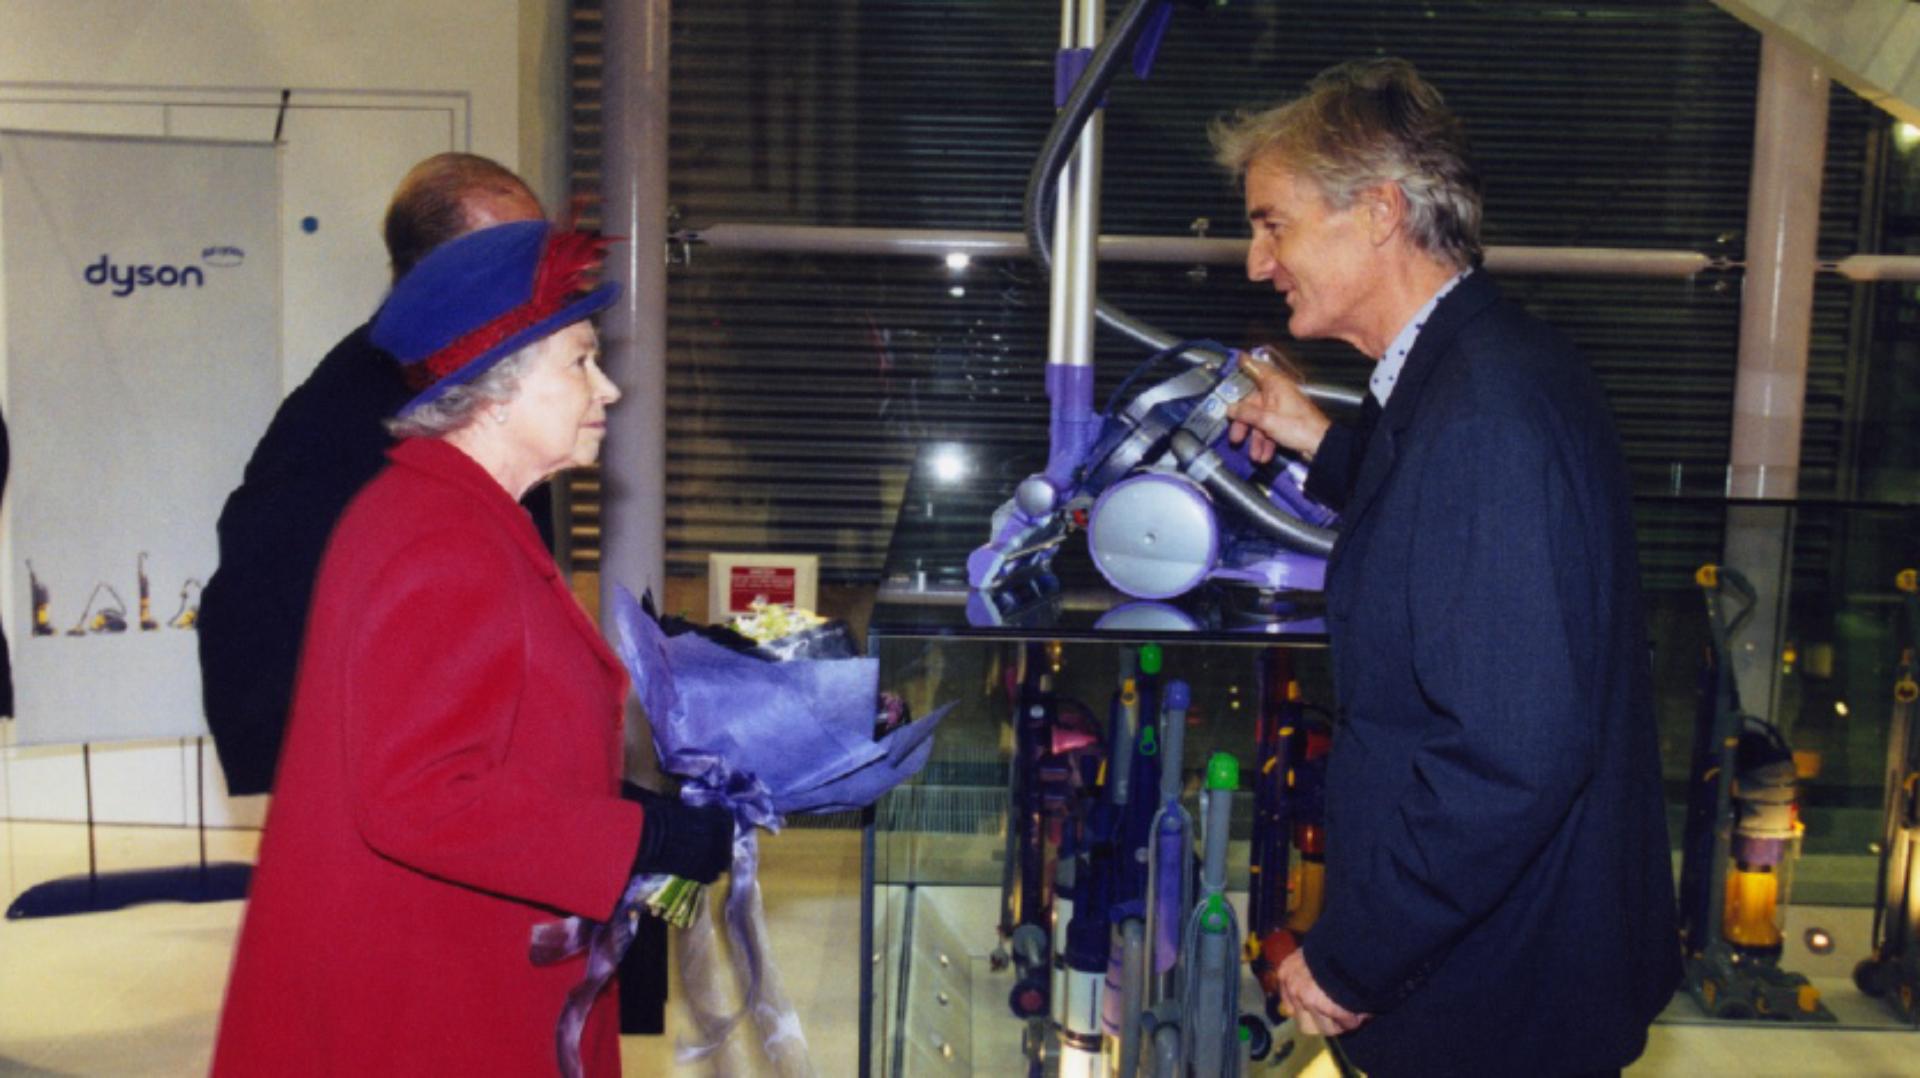 James Dyson meeting The Queen and The Duke of Edinburgh, 2001